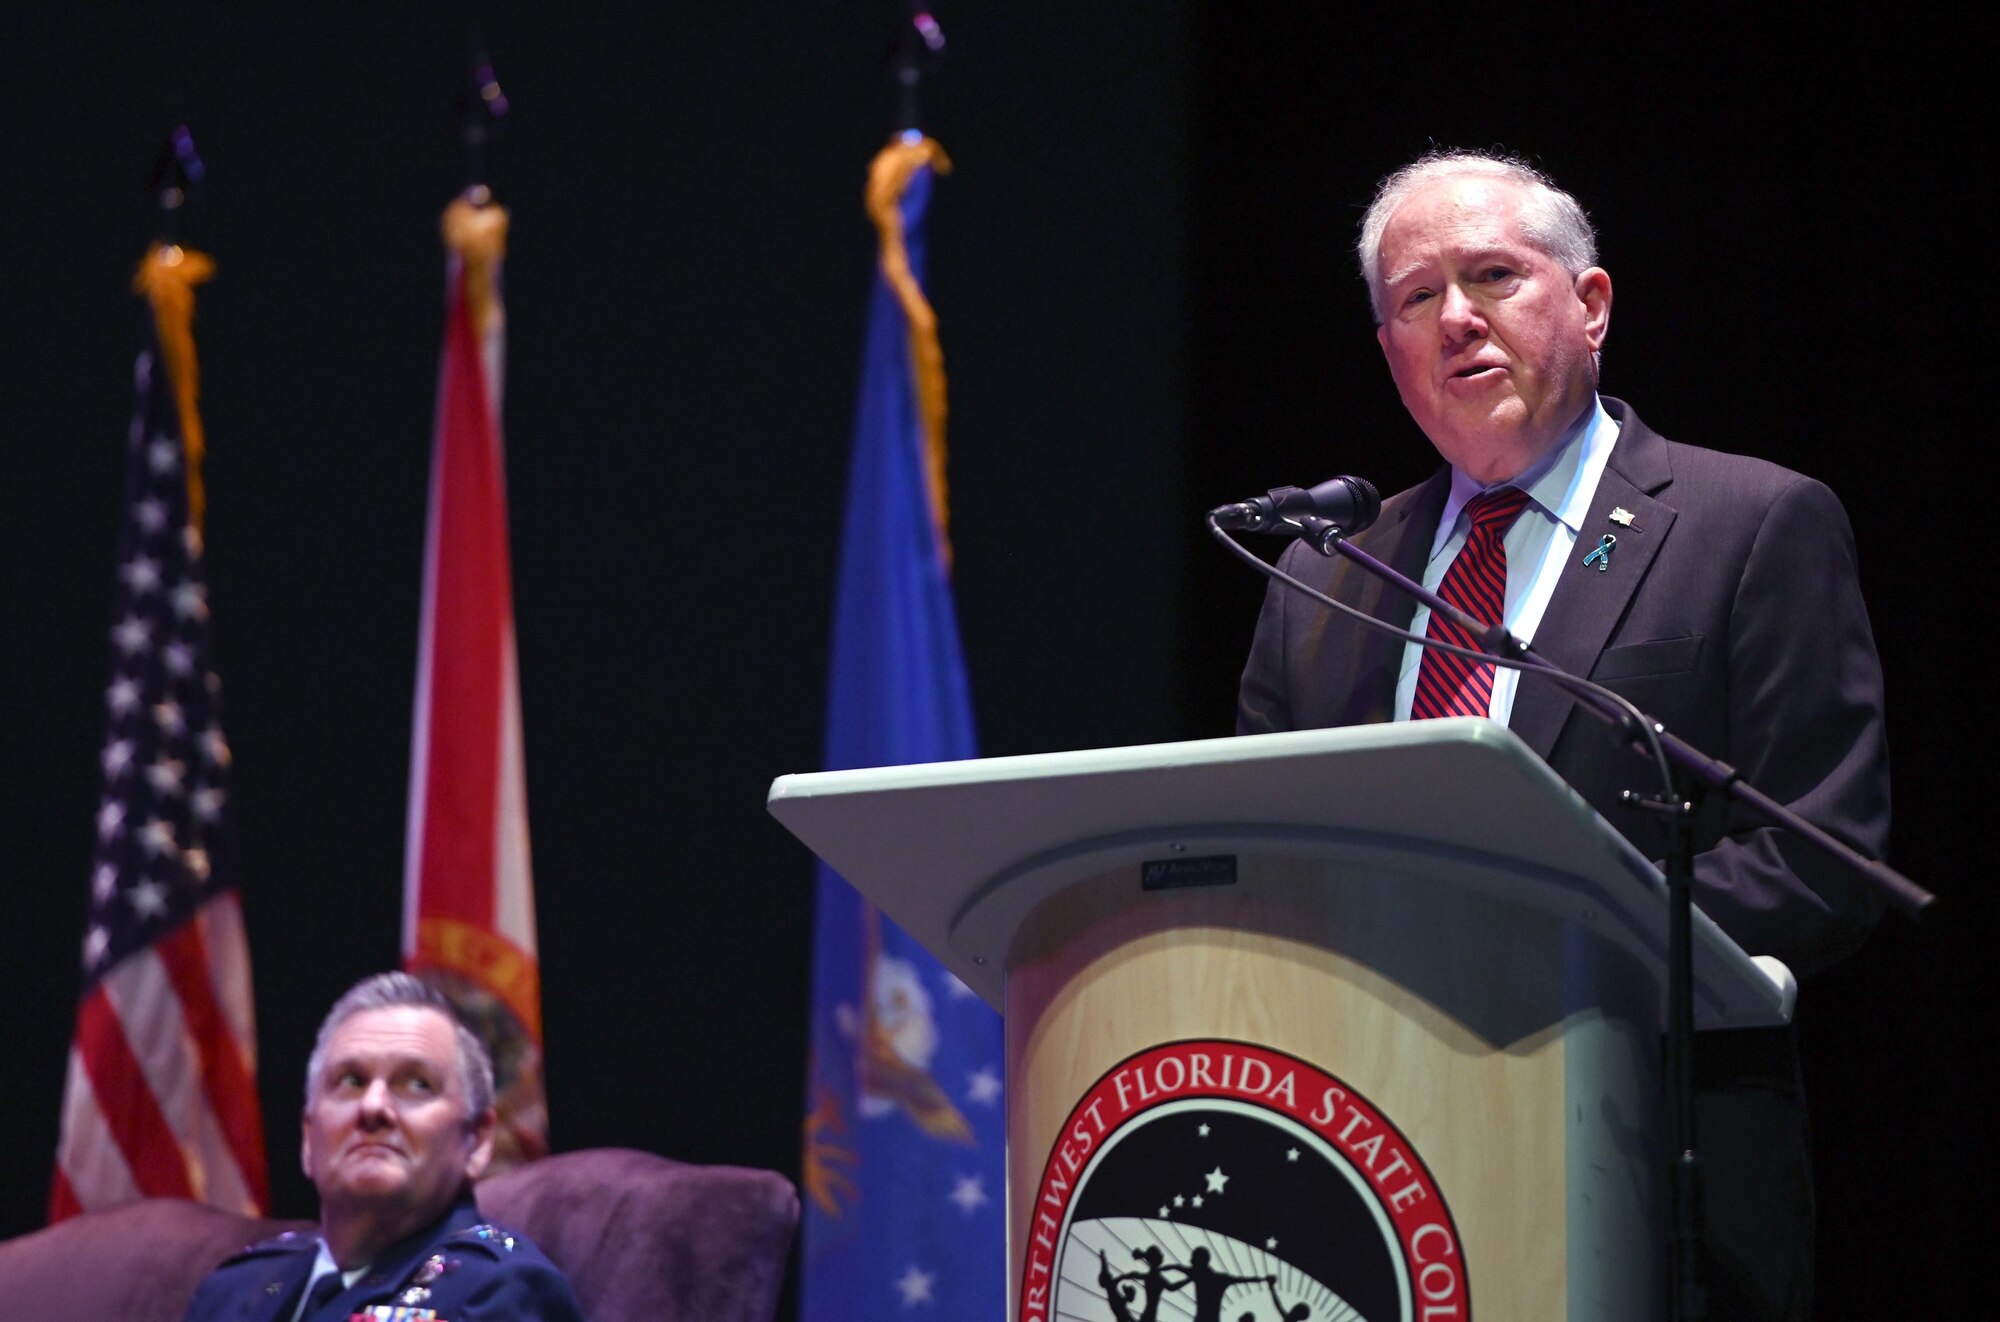 The Secretary of the Air Force, Frank Kendall III, speaks during the Doolittle Raider Goblet Ceremony at the Mattie Kelly Arts Center at Northwest Florida State College, Niceville, Florida, April 18, 2022. The ceremony marked the 80th Anniversary of the Doolittle Raid, also known as the Tokyo Raid, which was the first air operation to directly strike the mainland of Japan during World War II. (U.S. Air Force photo by Staff Sgt. Brandon Esau)